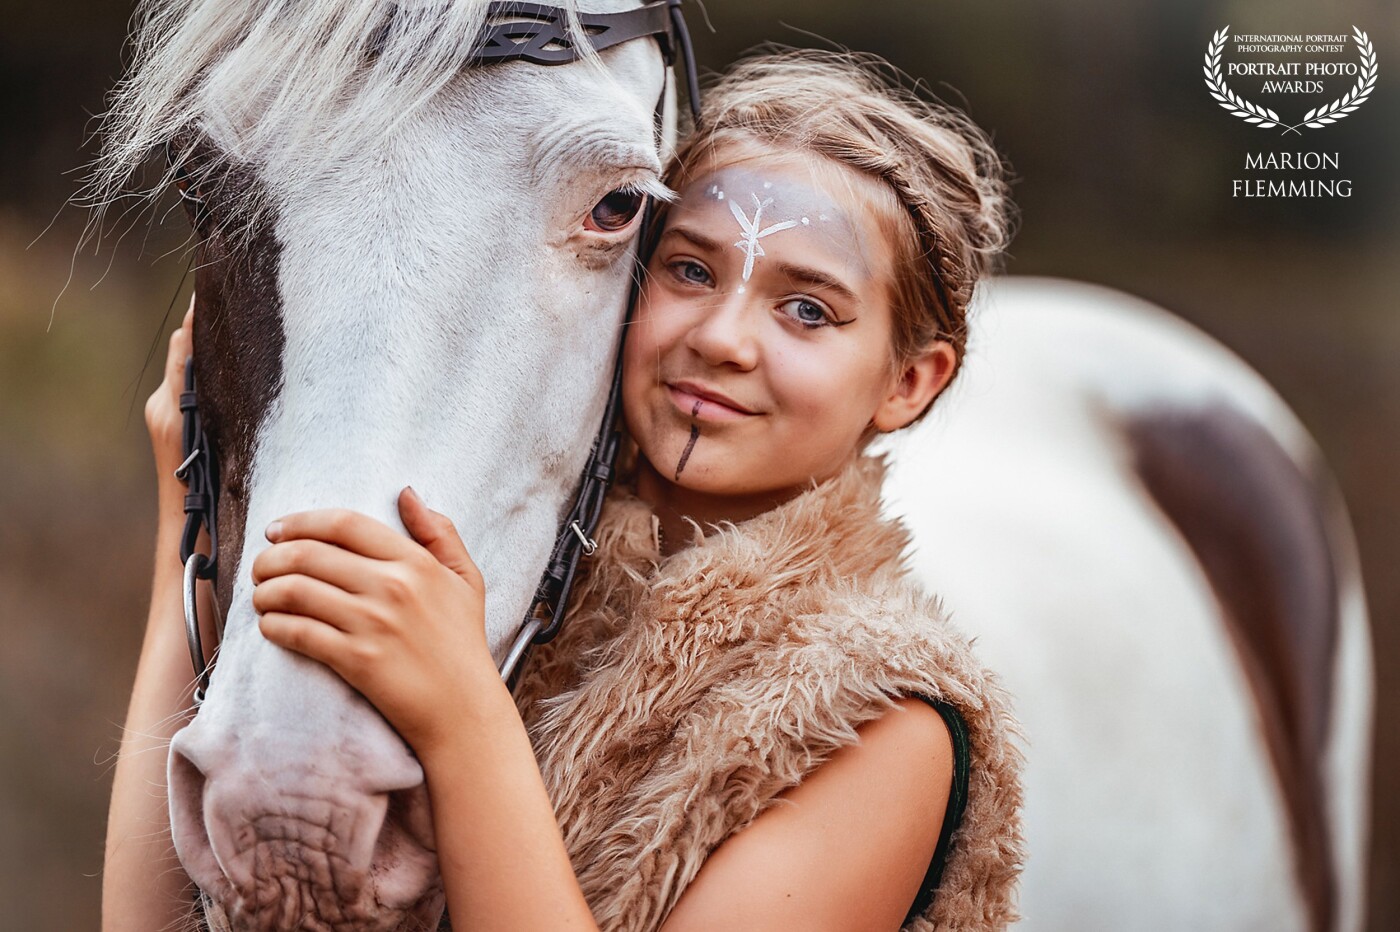 Little Viking <br />
<br />
Elisa and the spotted horse Tino during a photosession.  I love the details in the horse-eye and the beautiful make-up